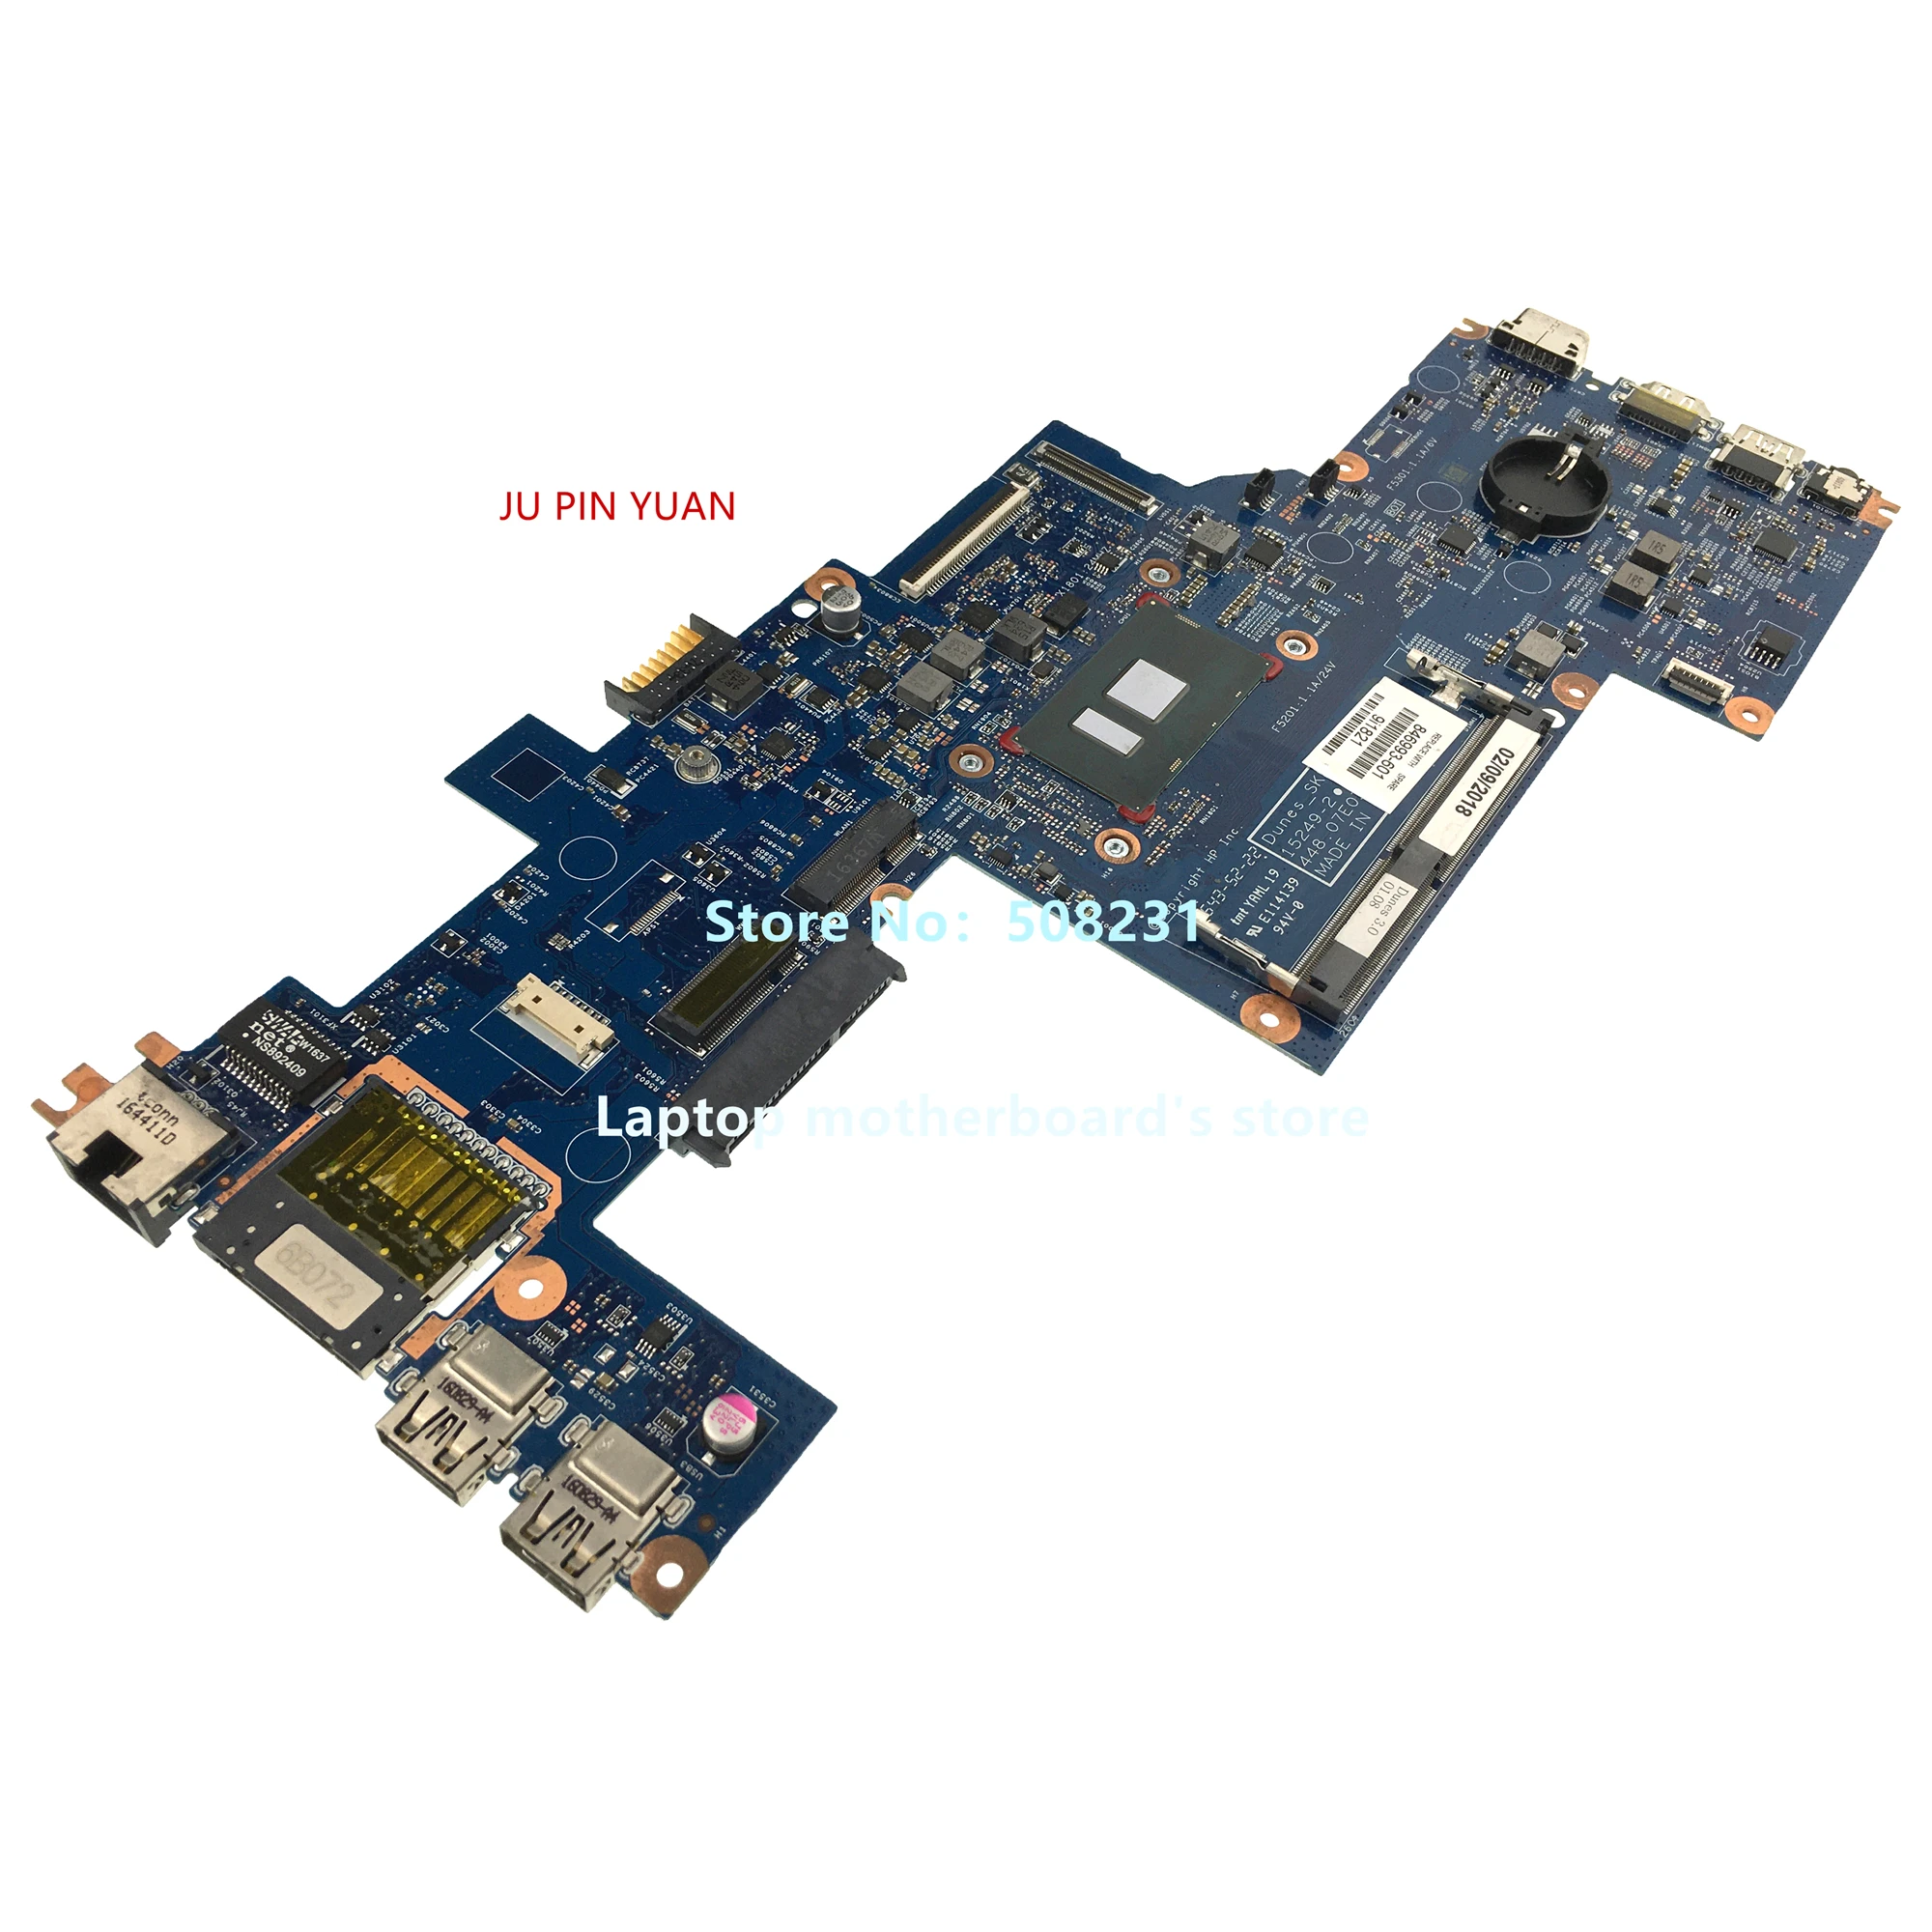 

For HP ProBook 11 G1 G2 Motherboard 846993-601 846993-001 846993-501 15249-3 448.07E03.0031 Mainboard With SR2EX 4405U CPU DDR3